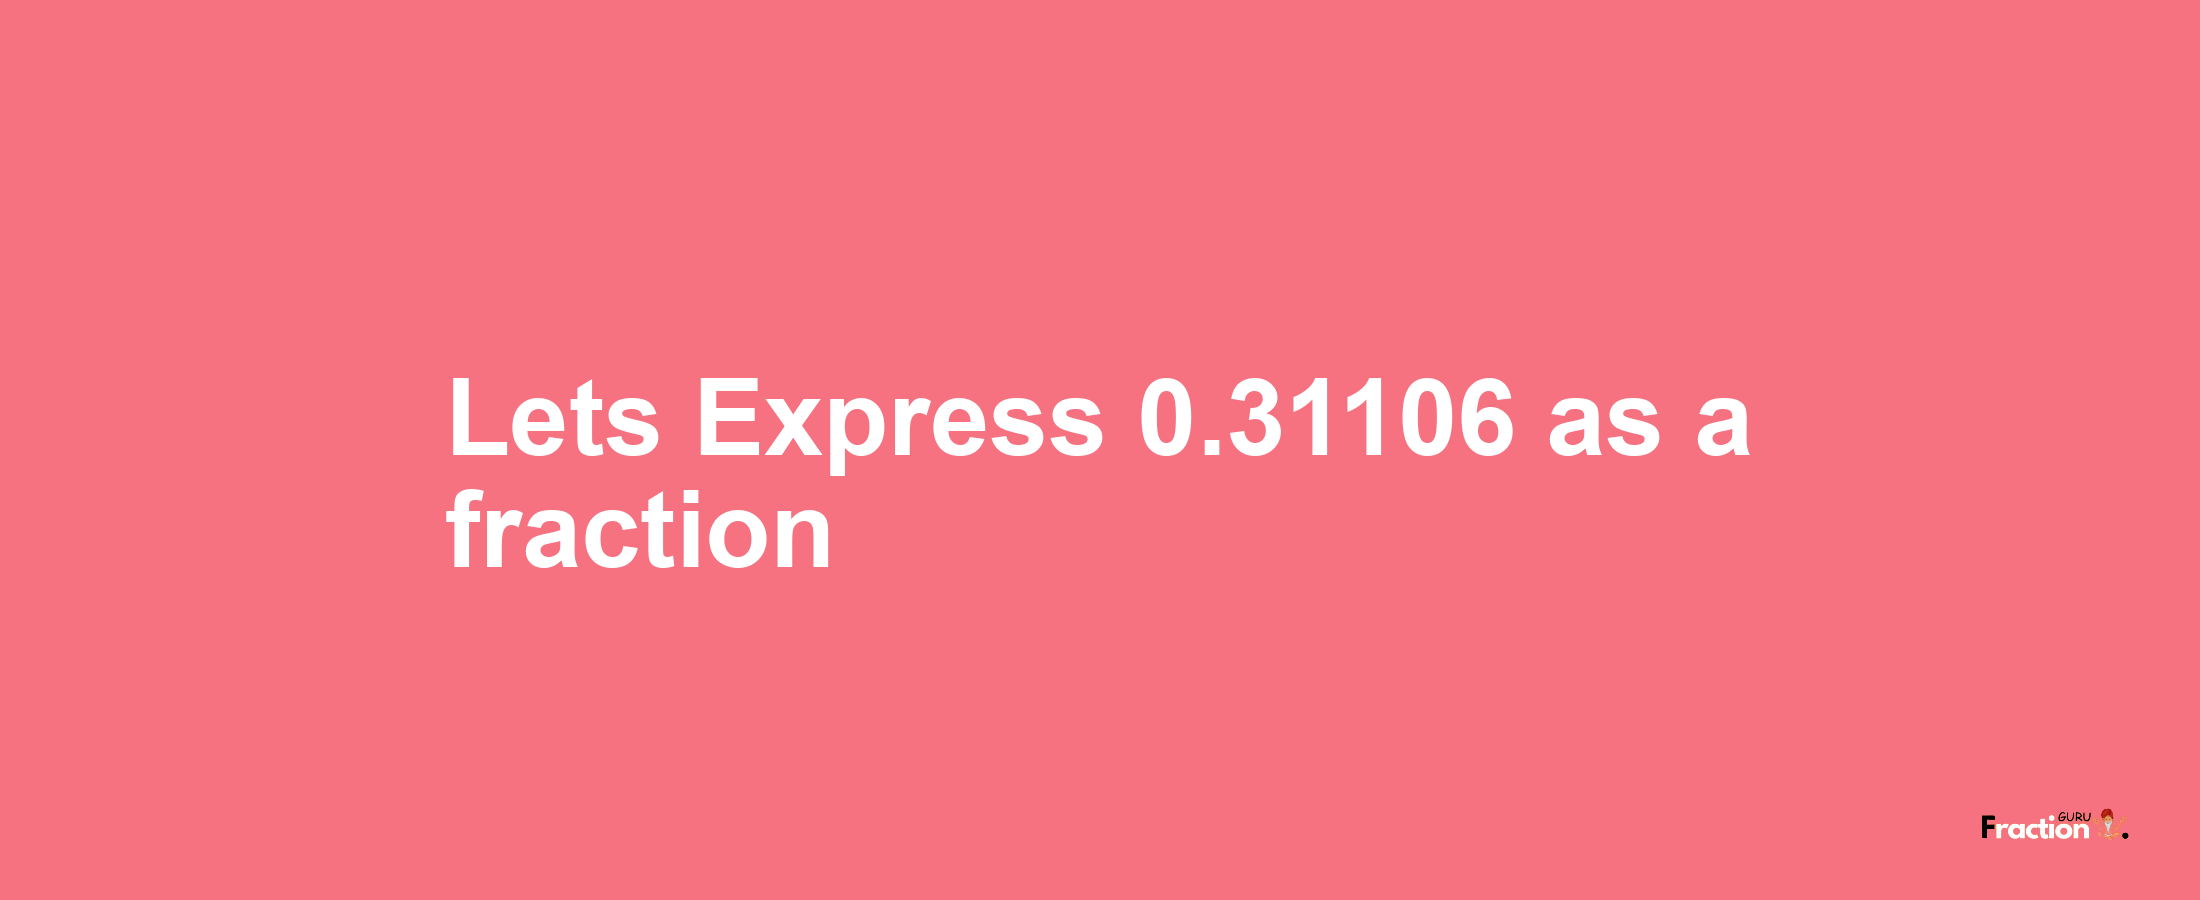 Lets Express 0.31106 as afraction